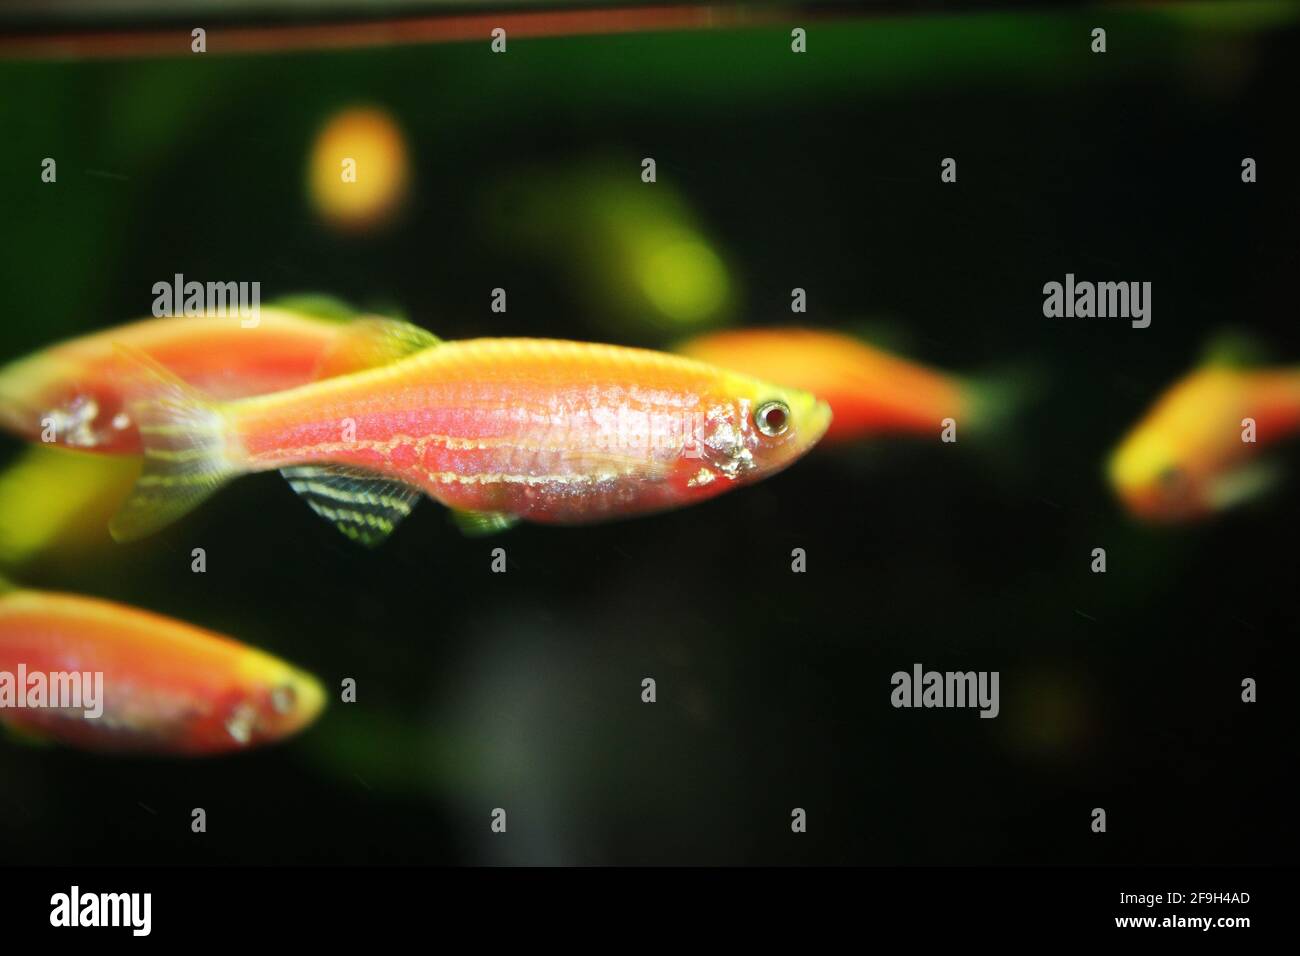 A group of zebrafish swimming in the aquarium Stock Photo